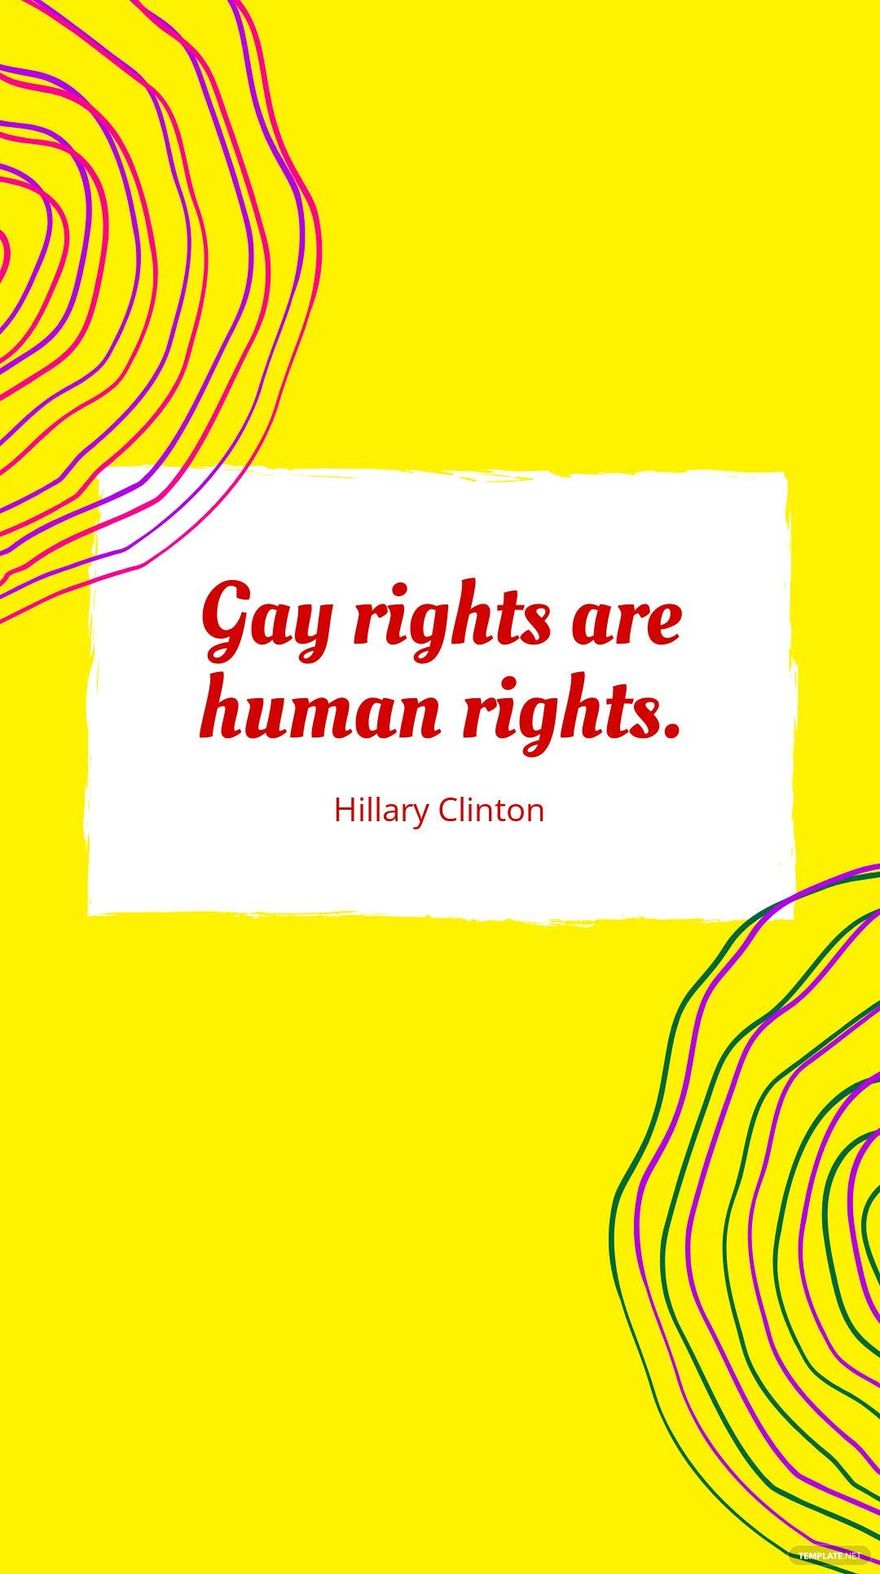 Hillary Clinton - Gay rights are human rights. in JPG